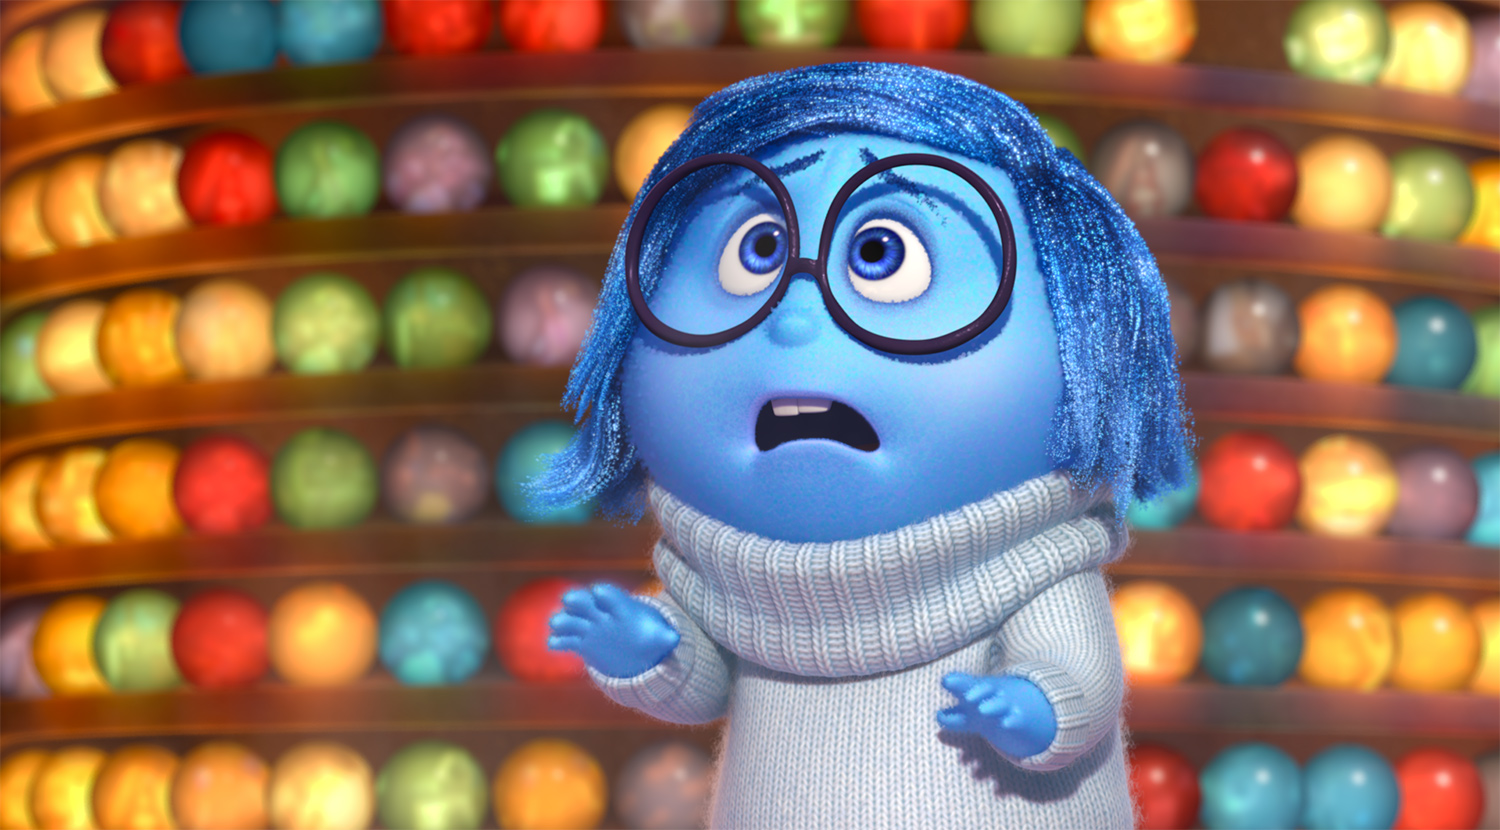 Sadness is one of the most remarkable disney characters with glasses